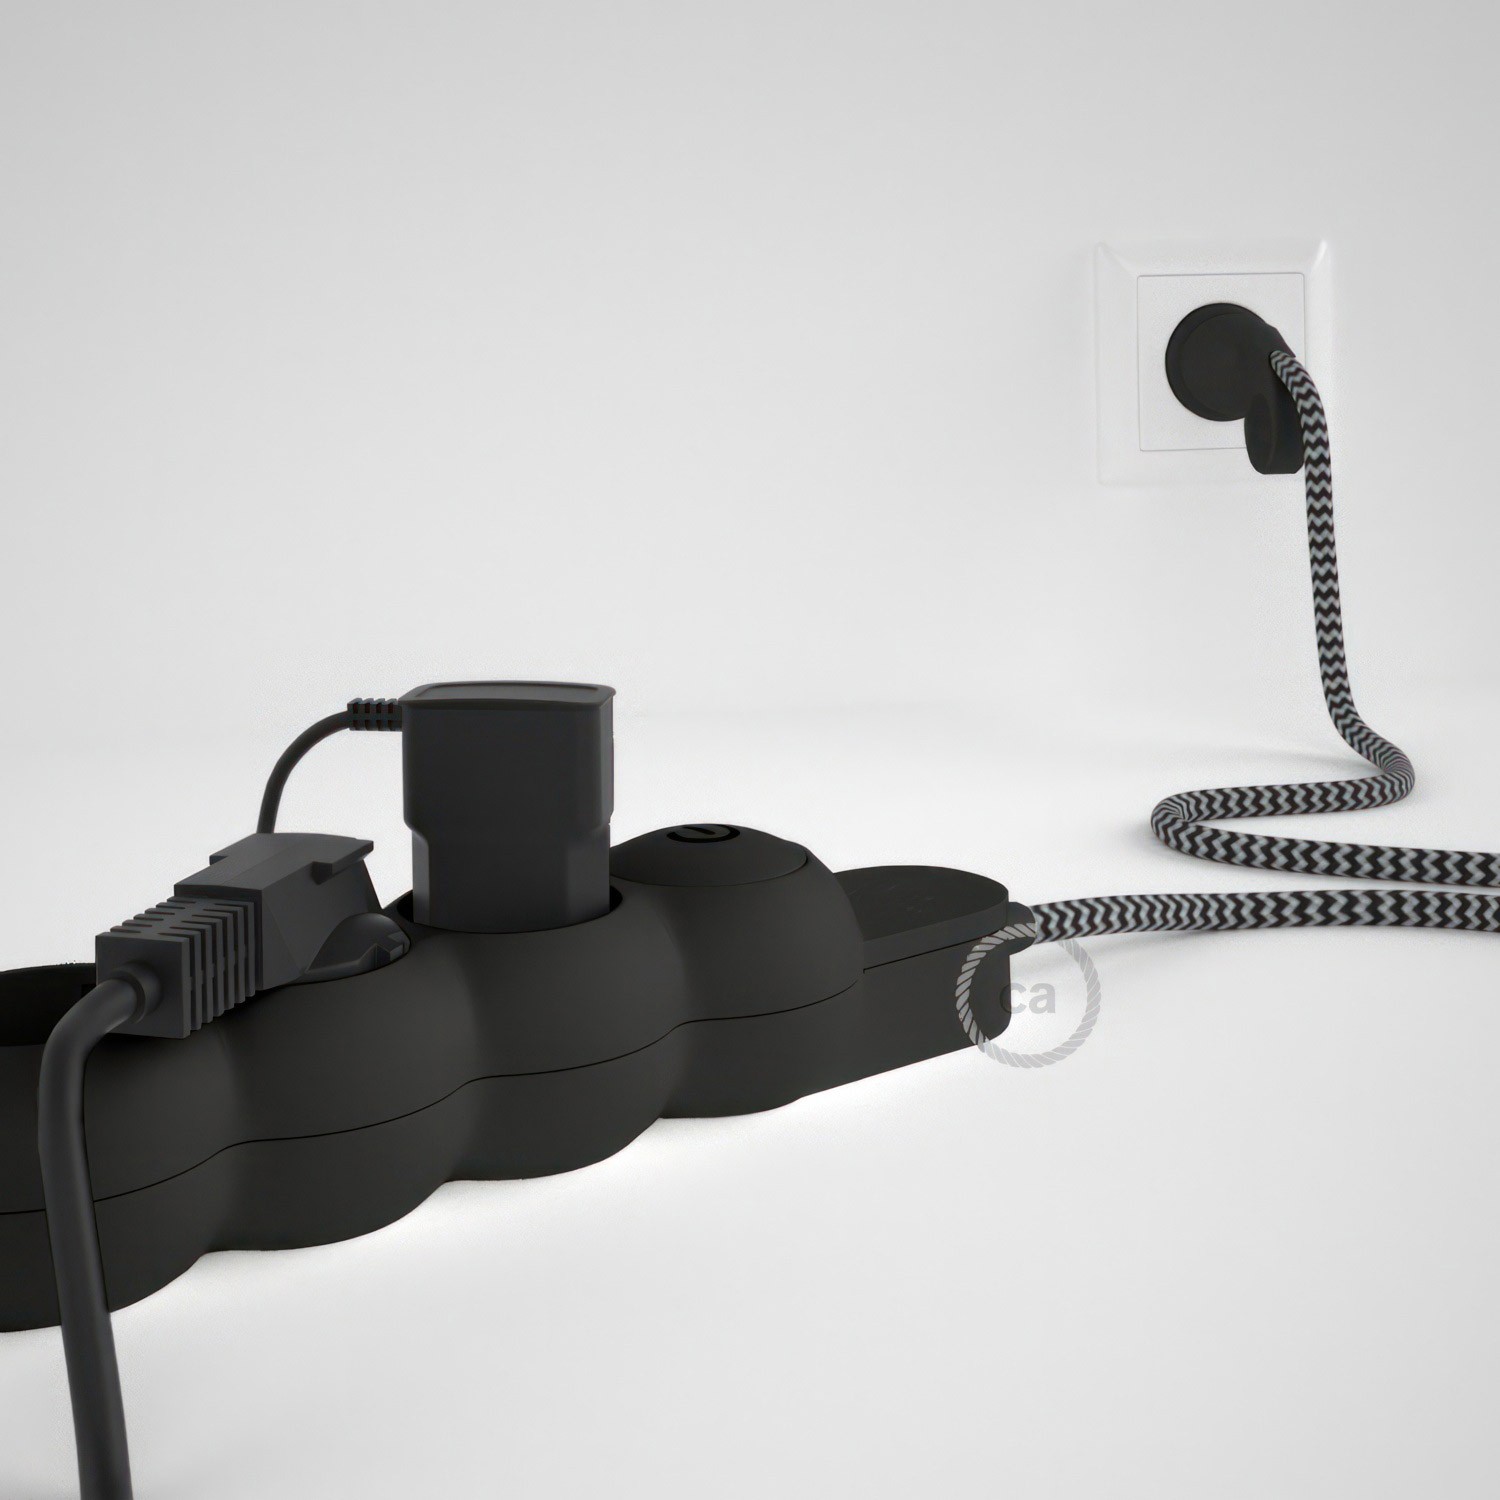 German power strip with electrical cable covered by rayon ZigZag Black RZ04 and Schuko plug with confort ring